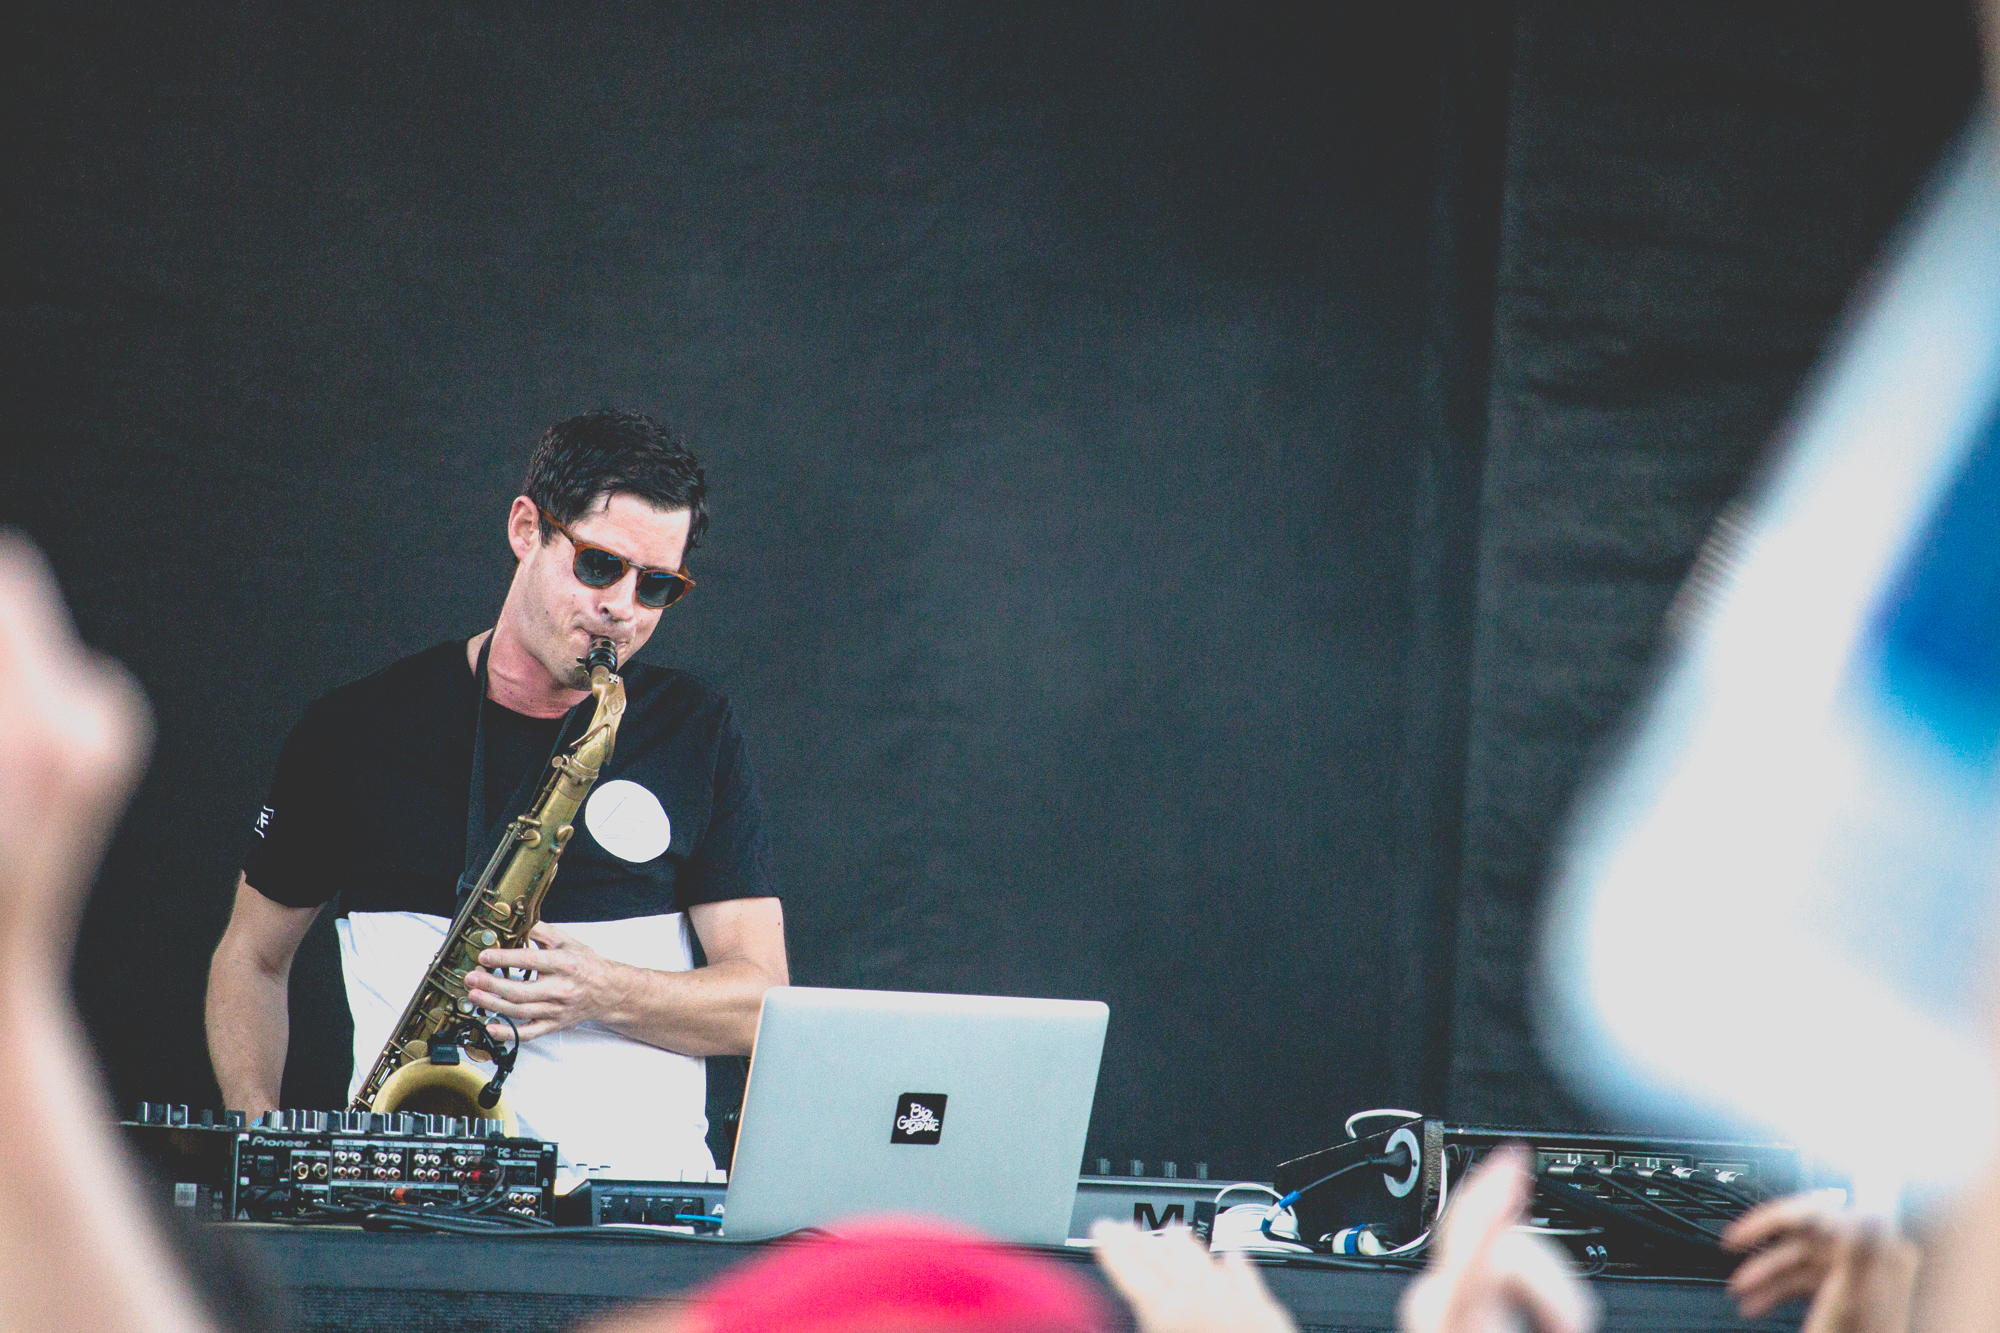 Live-tronica duo Big Gigantic gets dancy and saxxy along The Waterfront.